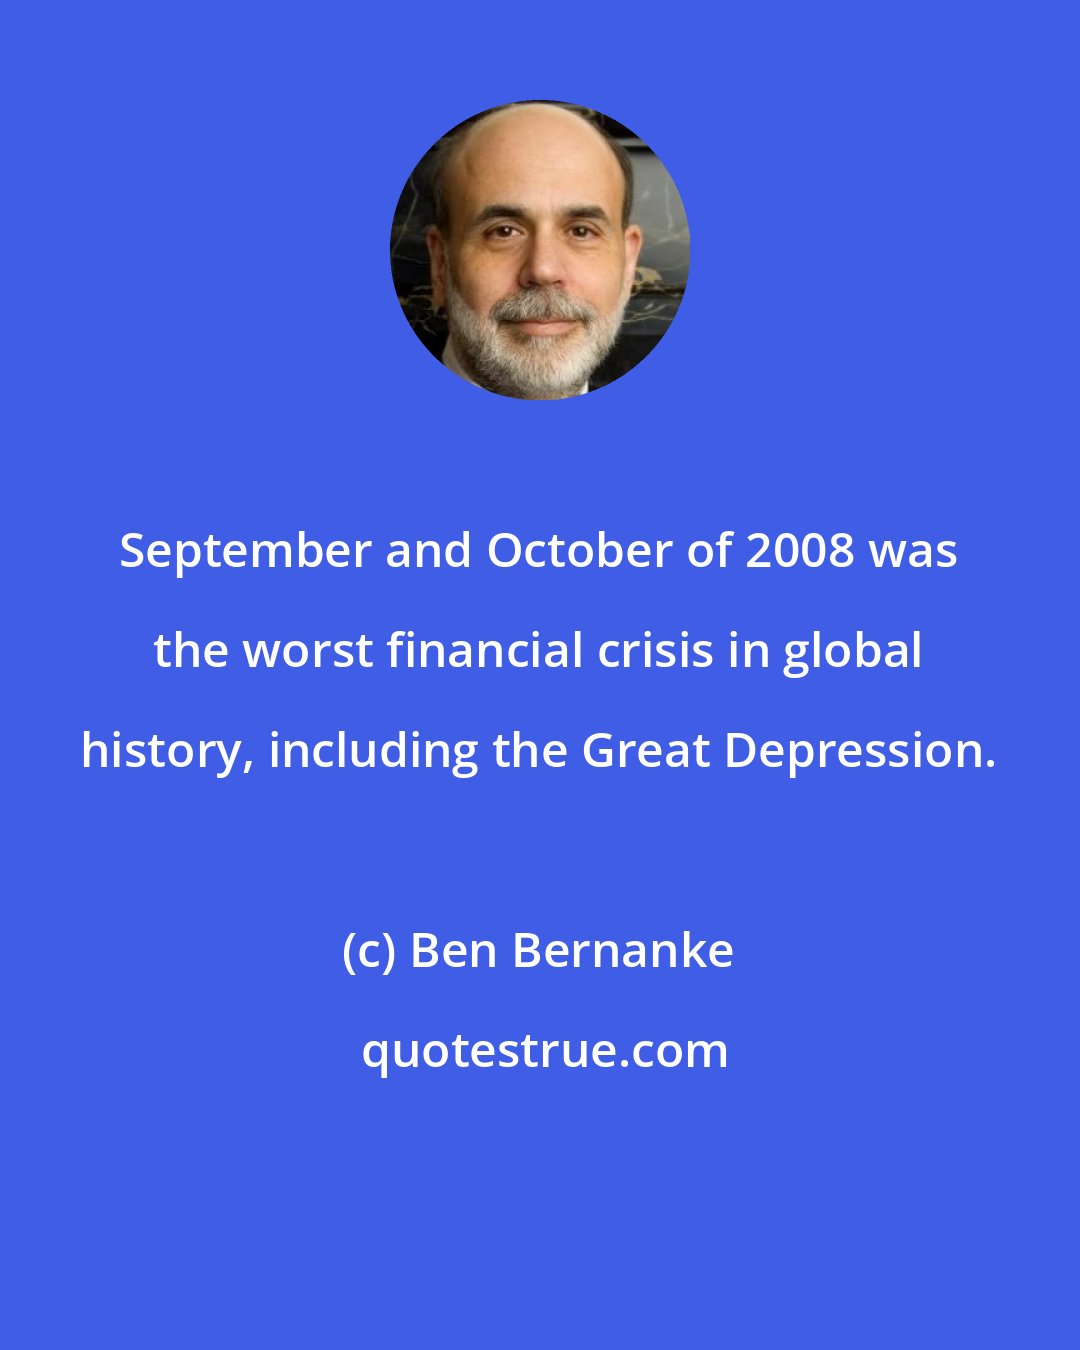 Ben Bernanke: September and October of 2008 was the worst financial crisis in global history, including the Great Depression.